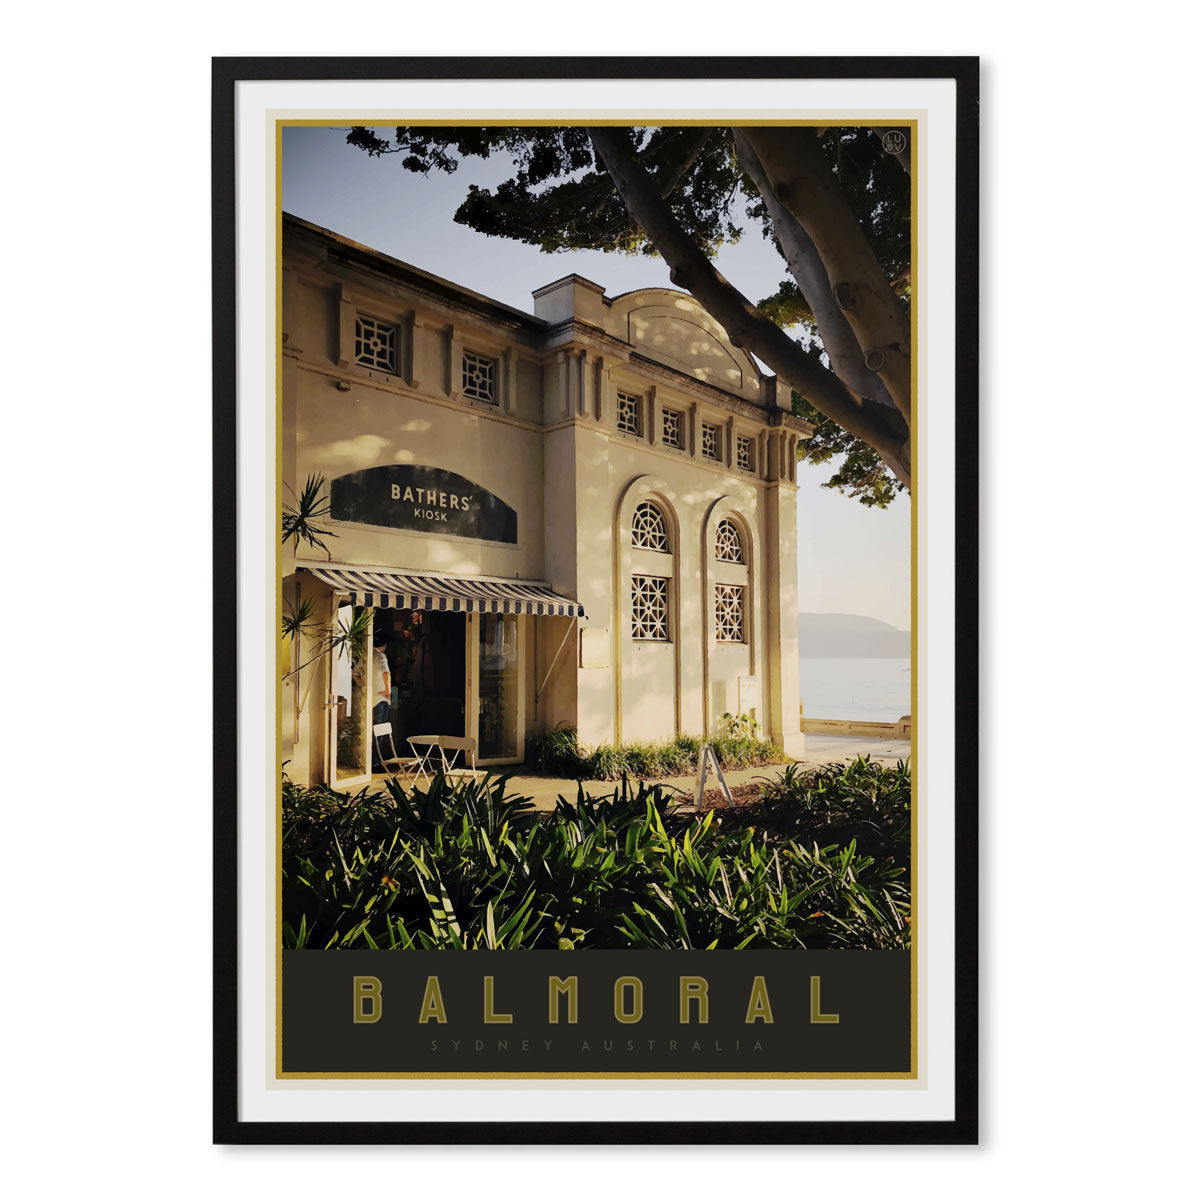 Balmoral print black framed - vintage travel style  by places we luv